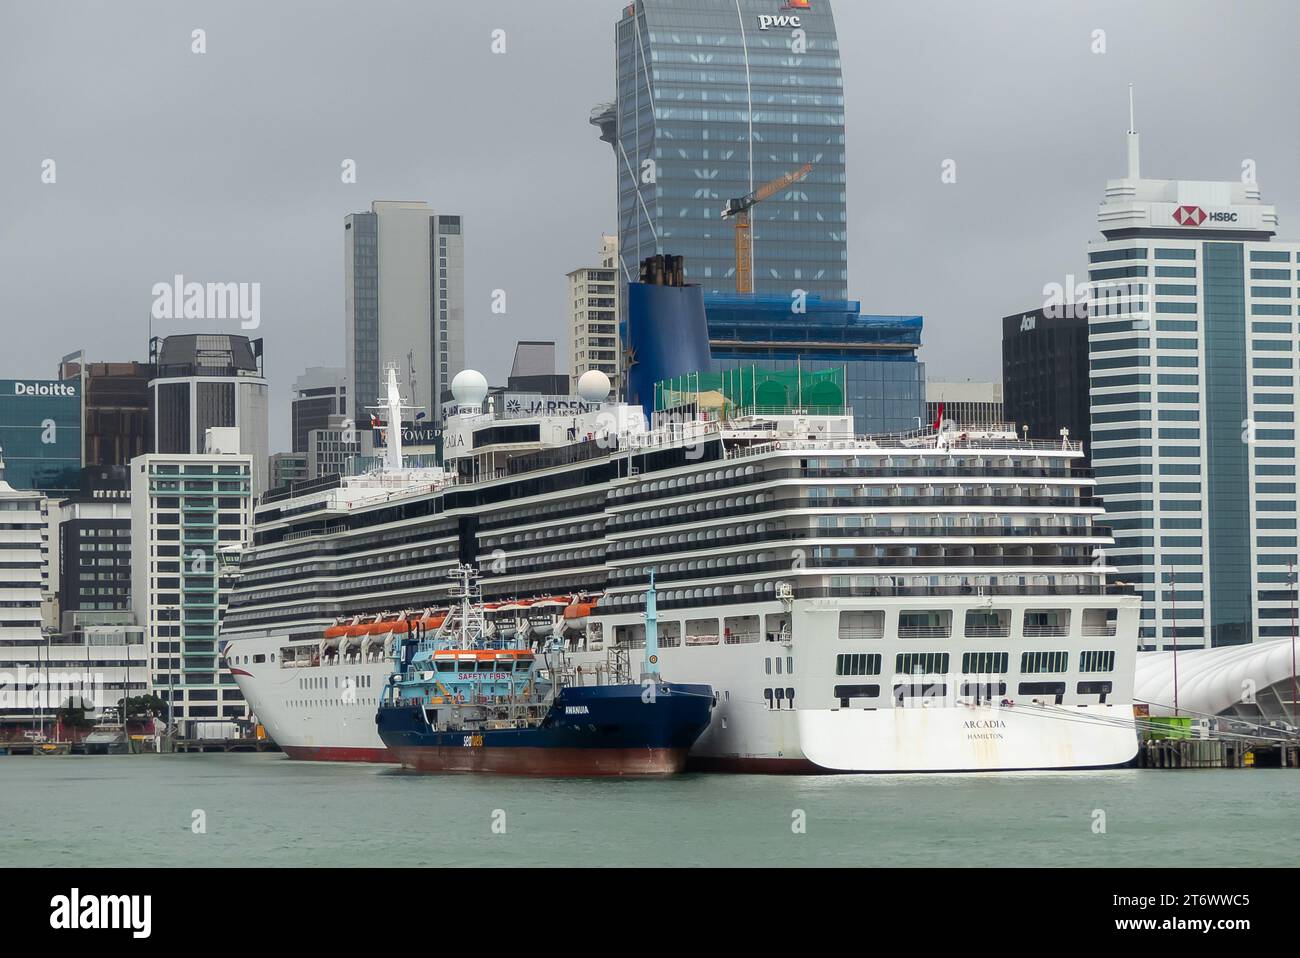 The P & O cruise ship 'Arcadia' refuelling in Auckland Harbour, New Zealand Stock Photo